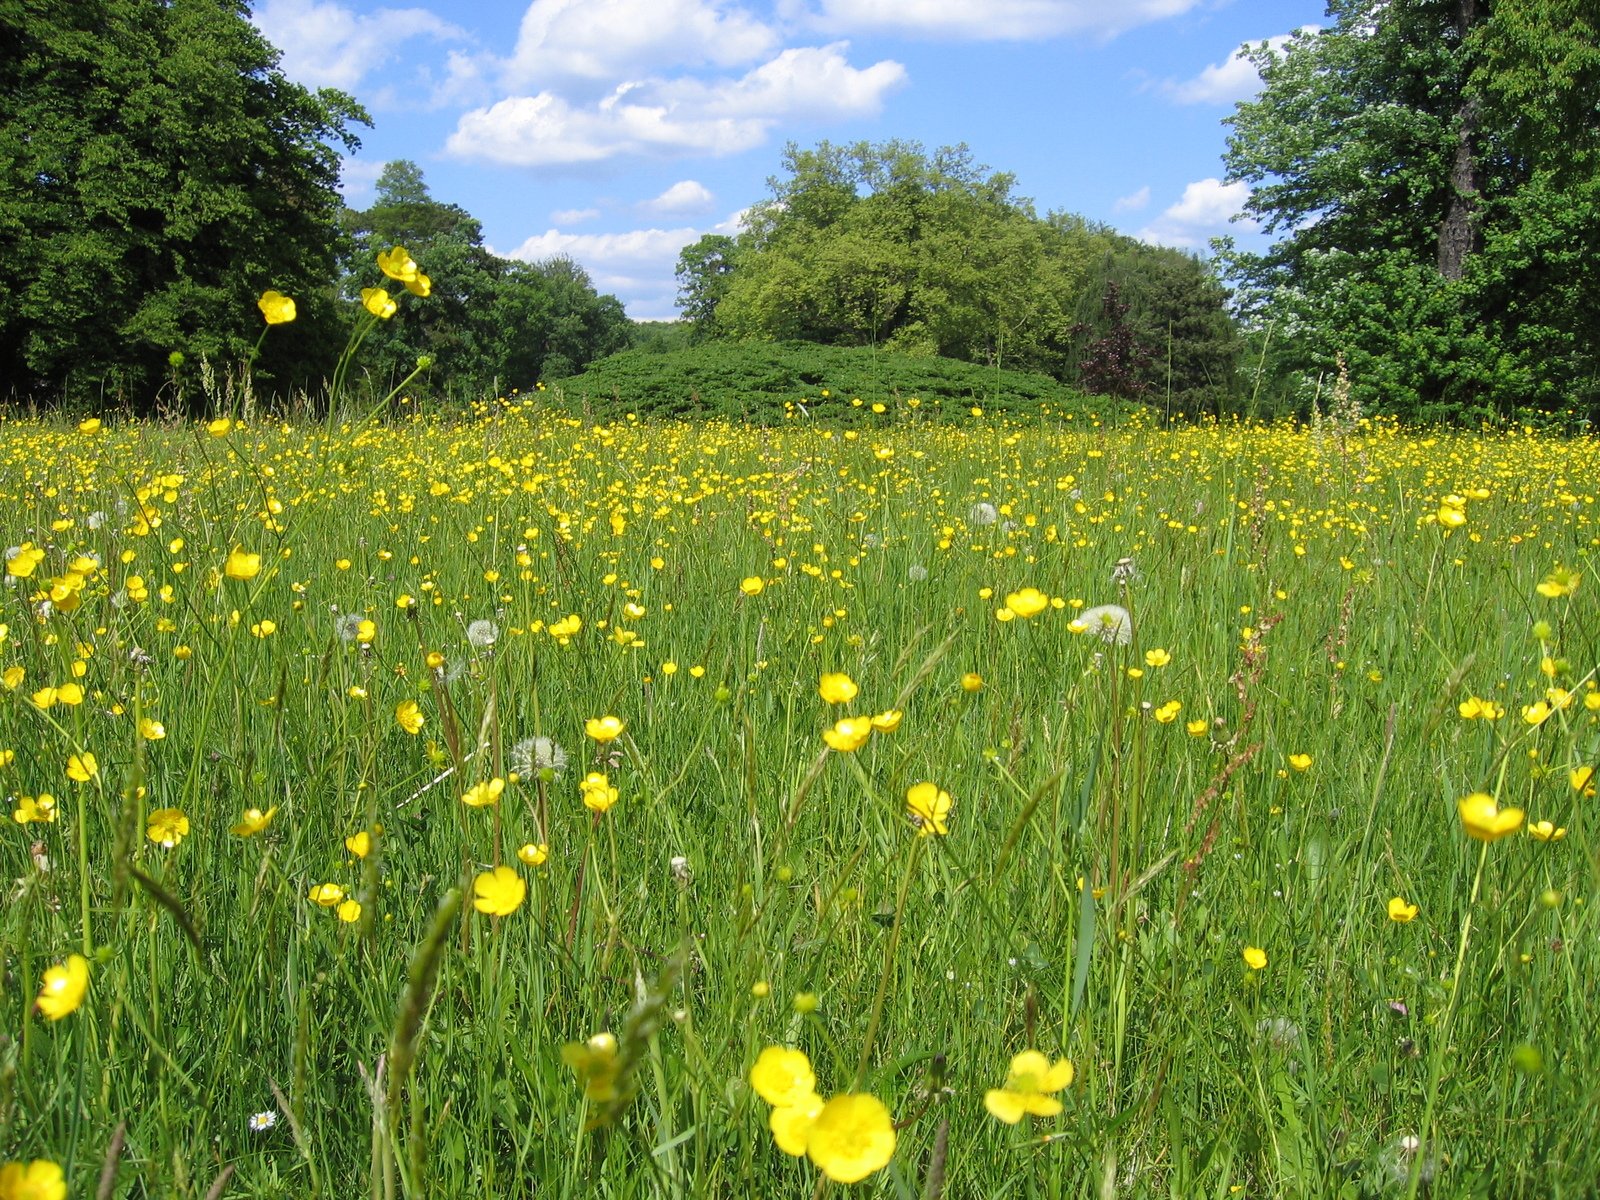 the yellow flowers are in the tall green grass